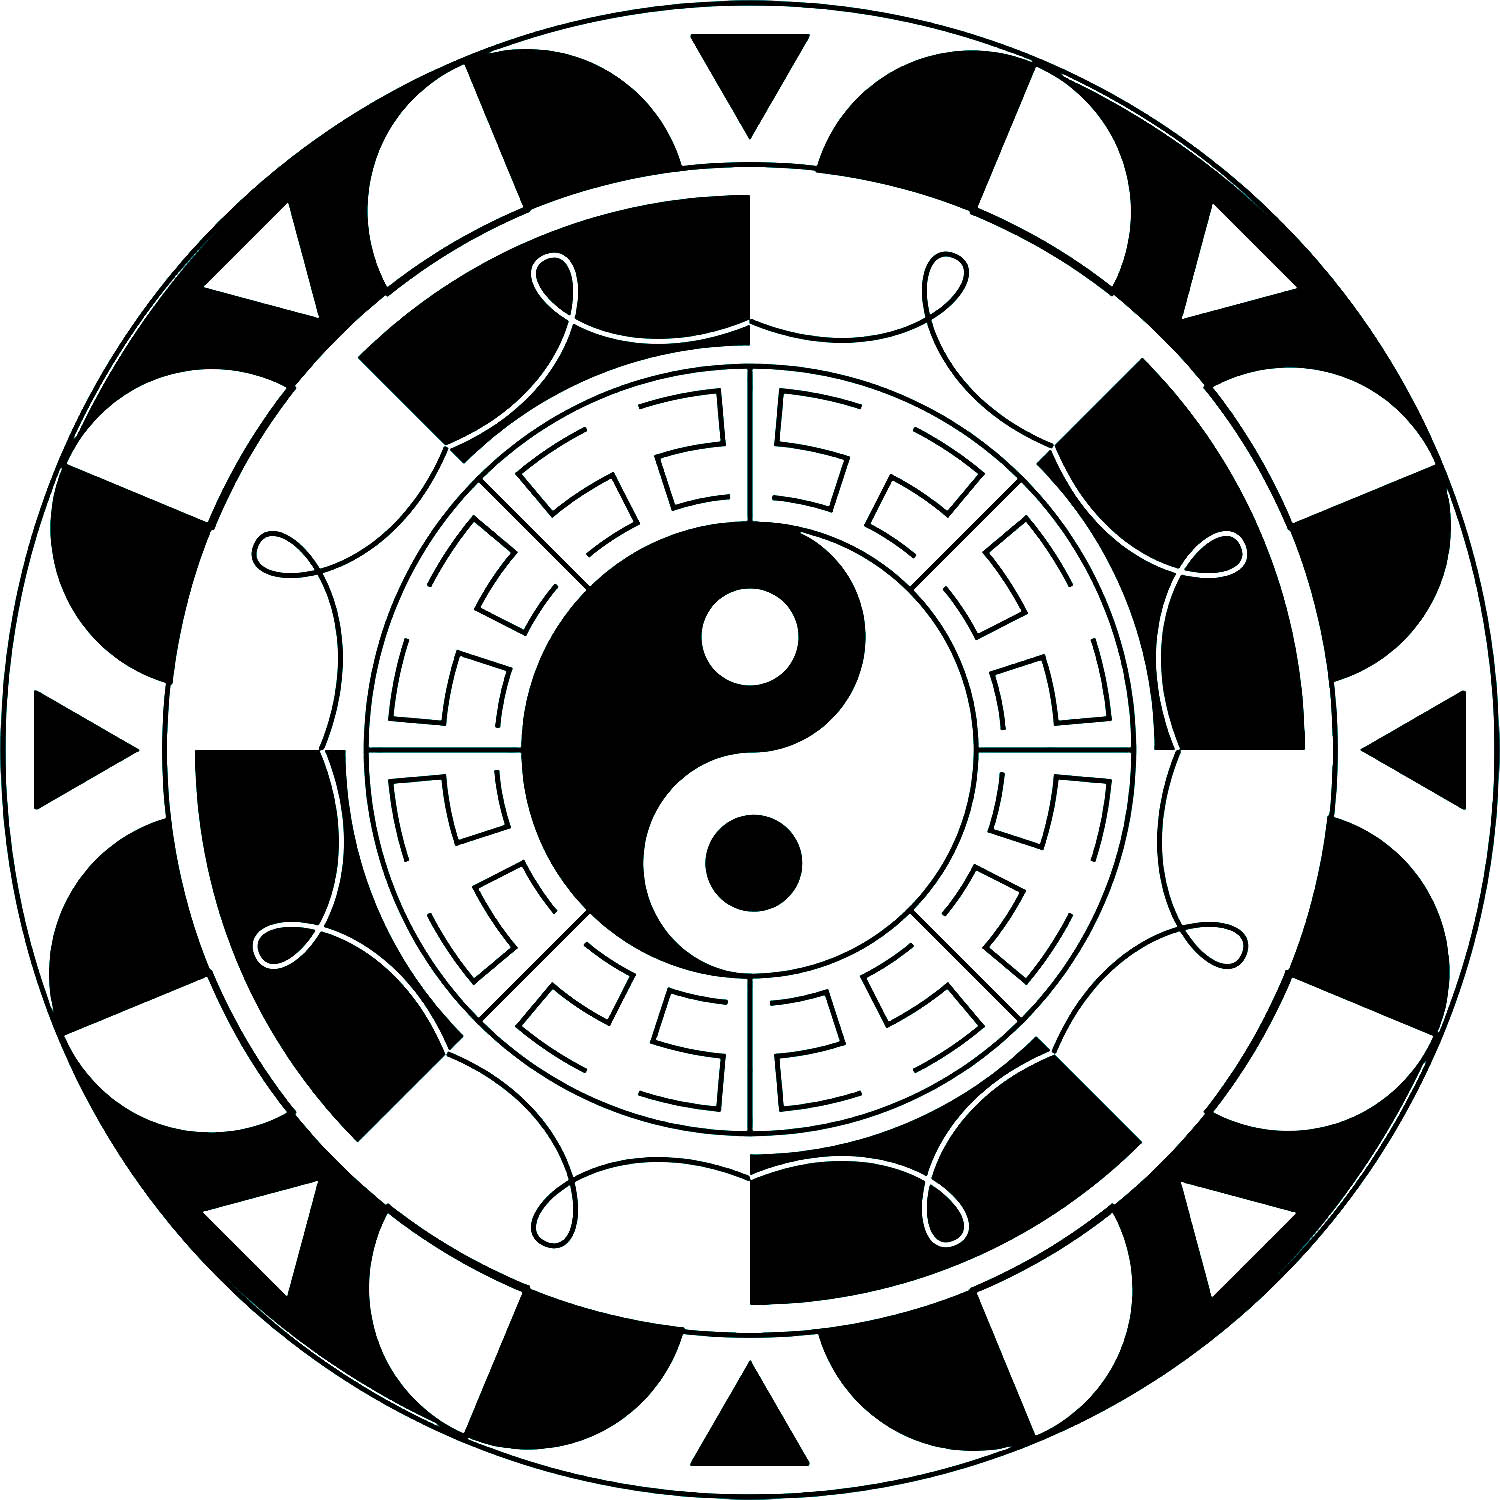 Yin & Yang is an ancient Chinese symbol which represents dual nature of things like light and dark, good and evil, positive and negative.